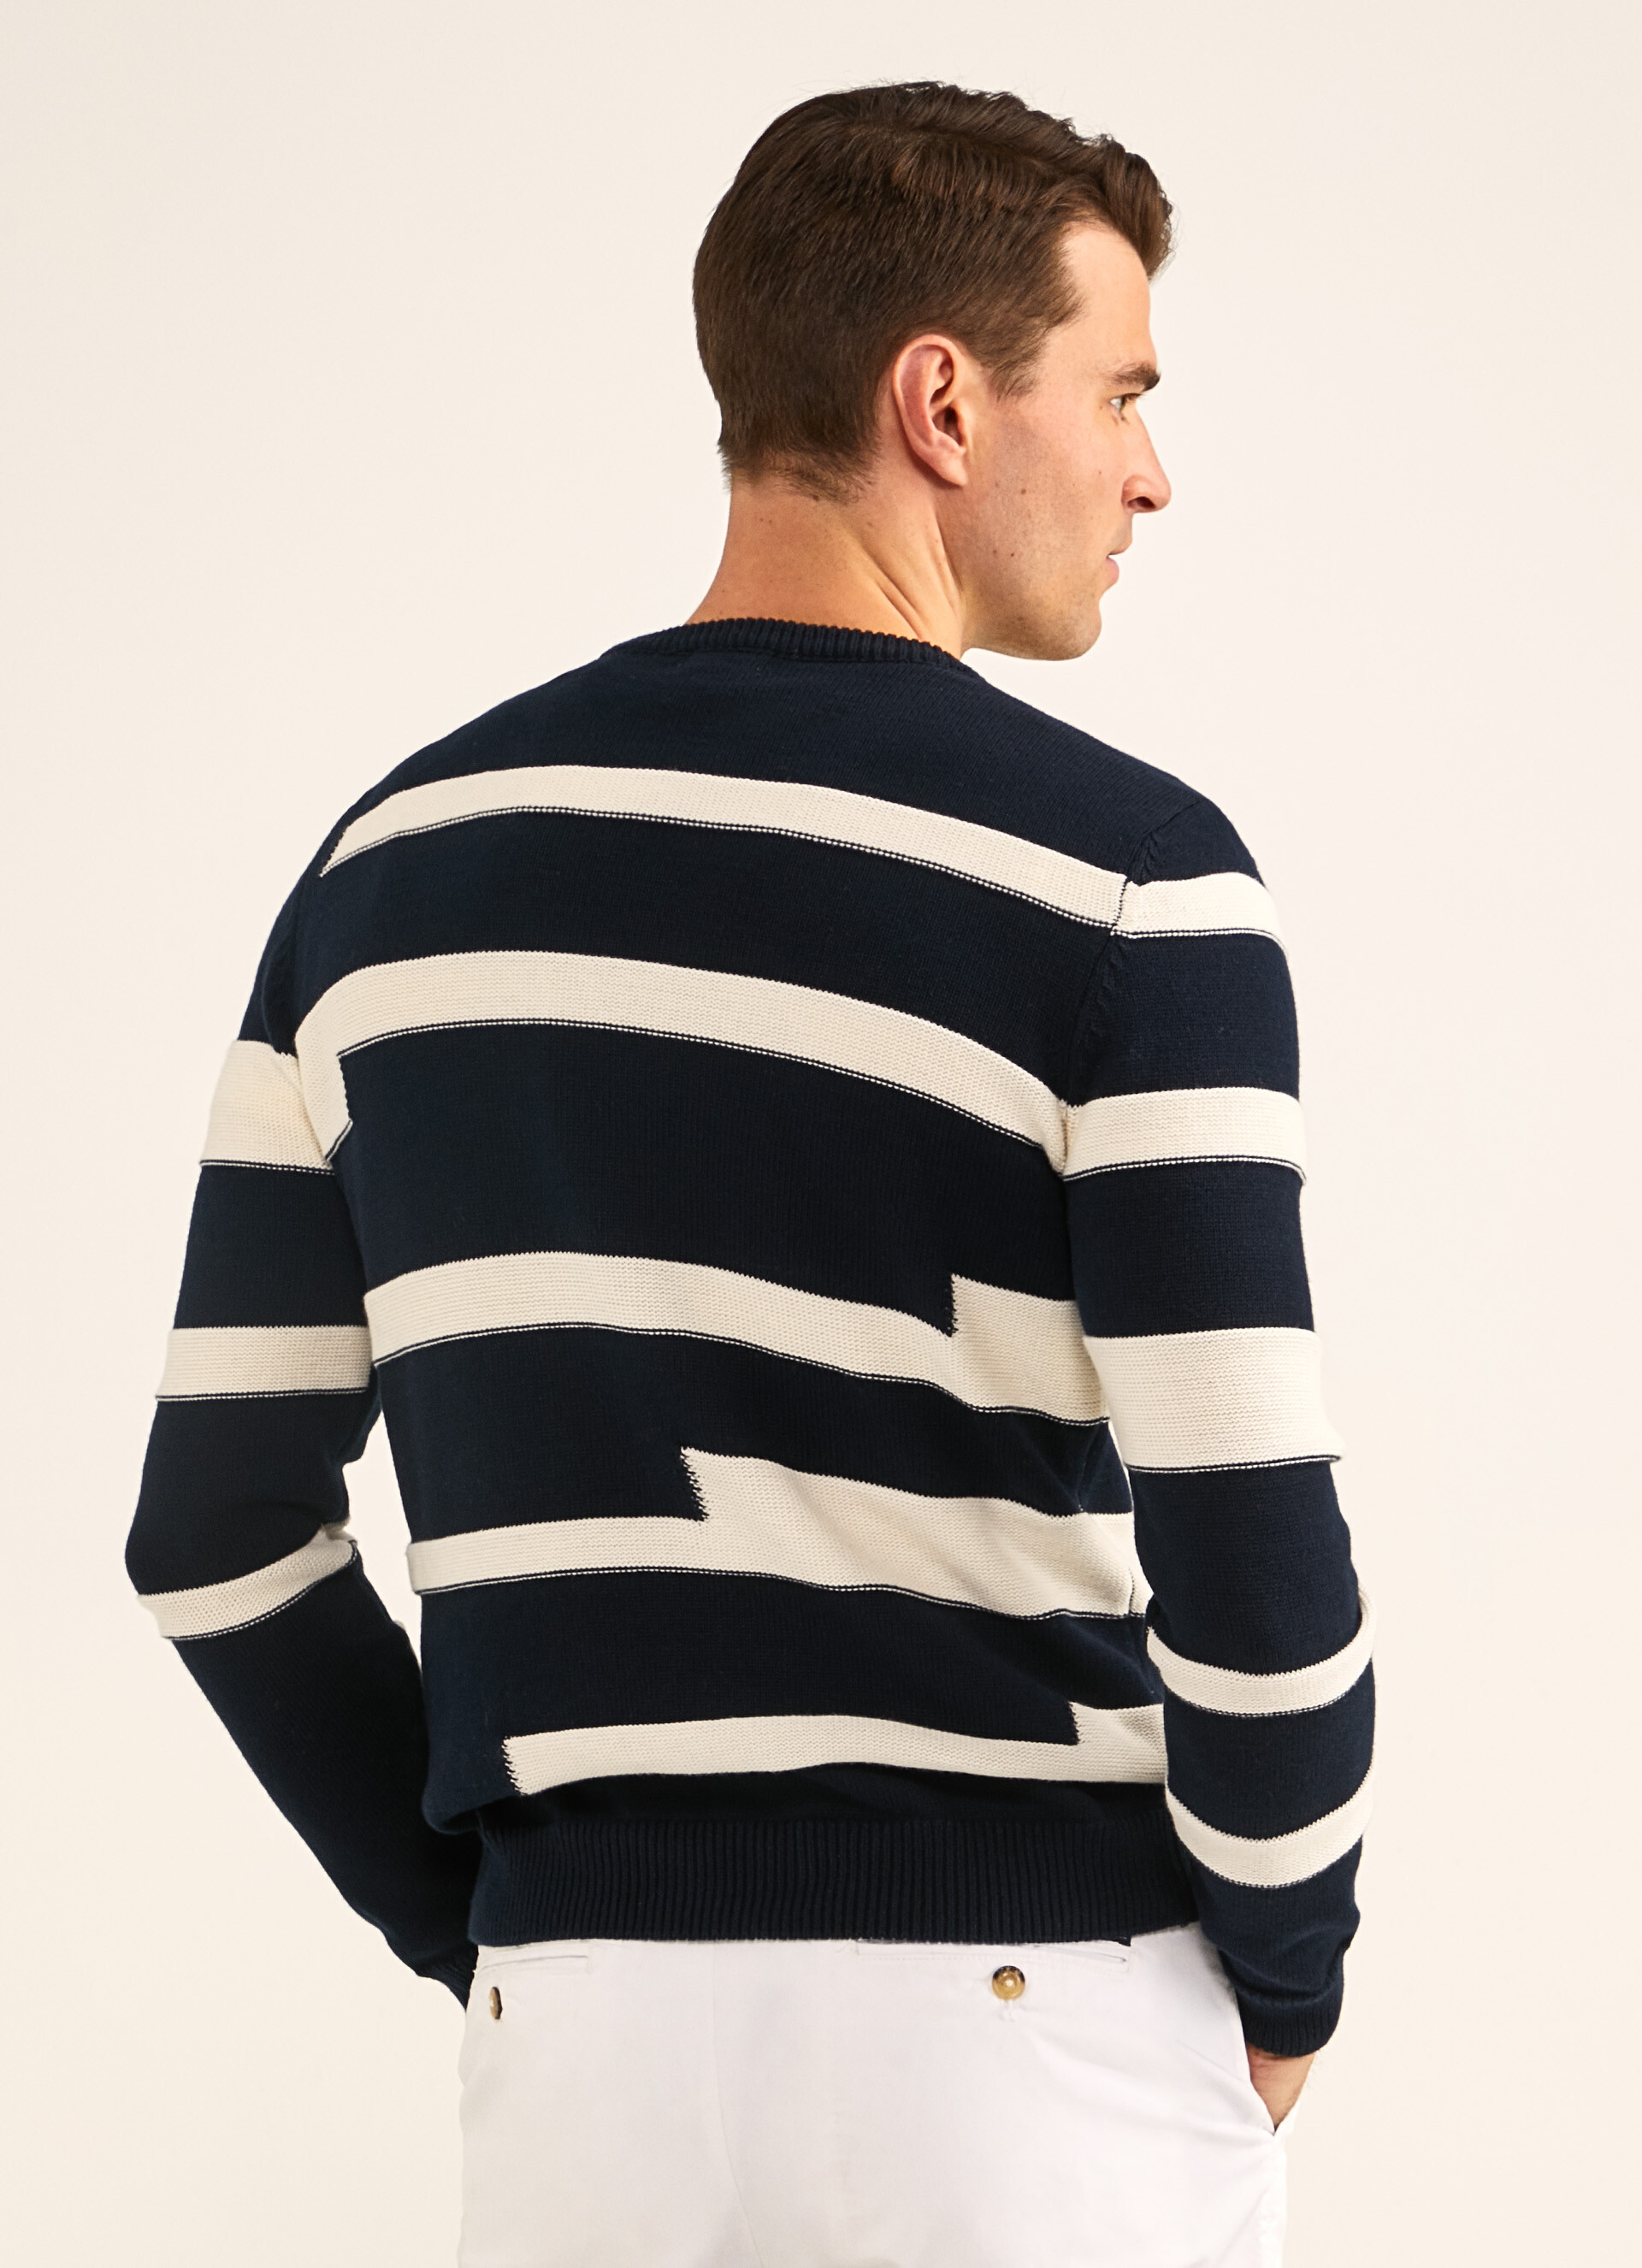 Intarsia Striped Jersey | Façonnable